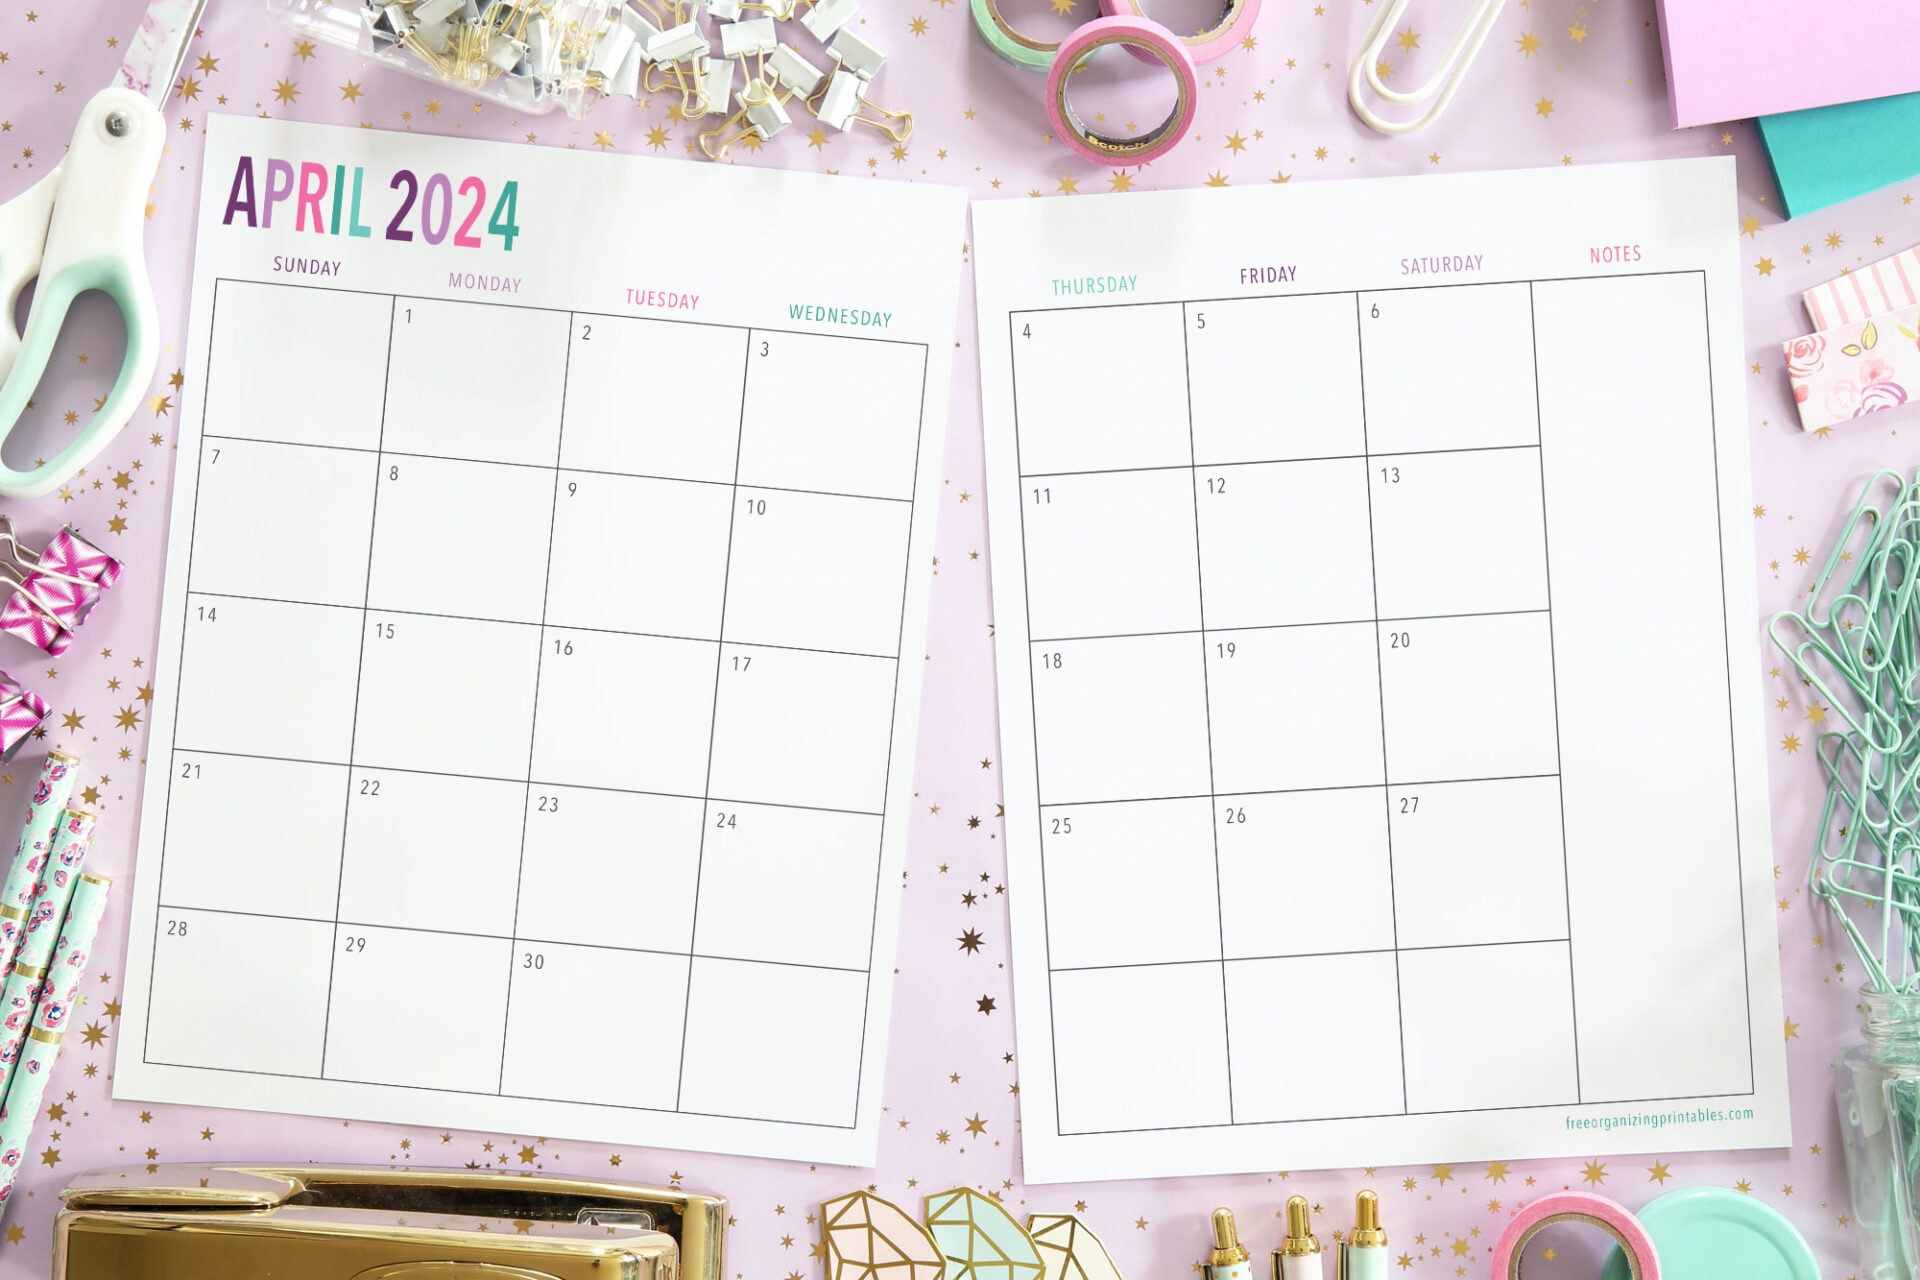 Free Printable 2 Page Blank Monthly Calendar 2024 within Free Printable Calendar 2024 5.5 X 8.5